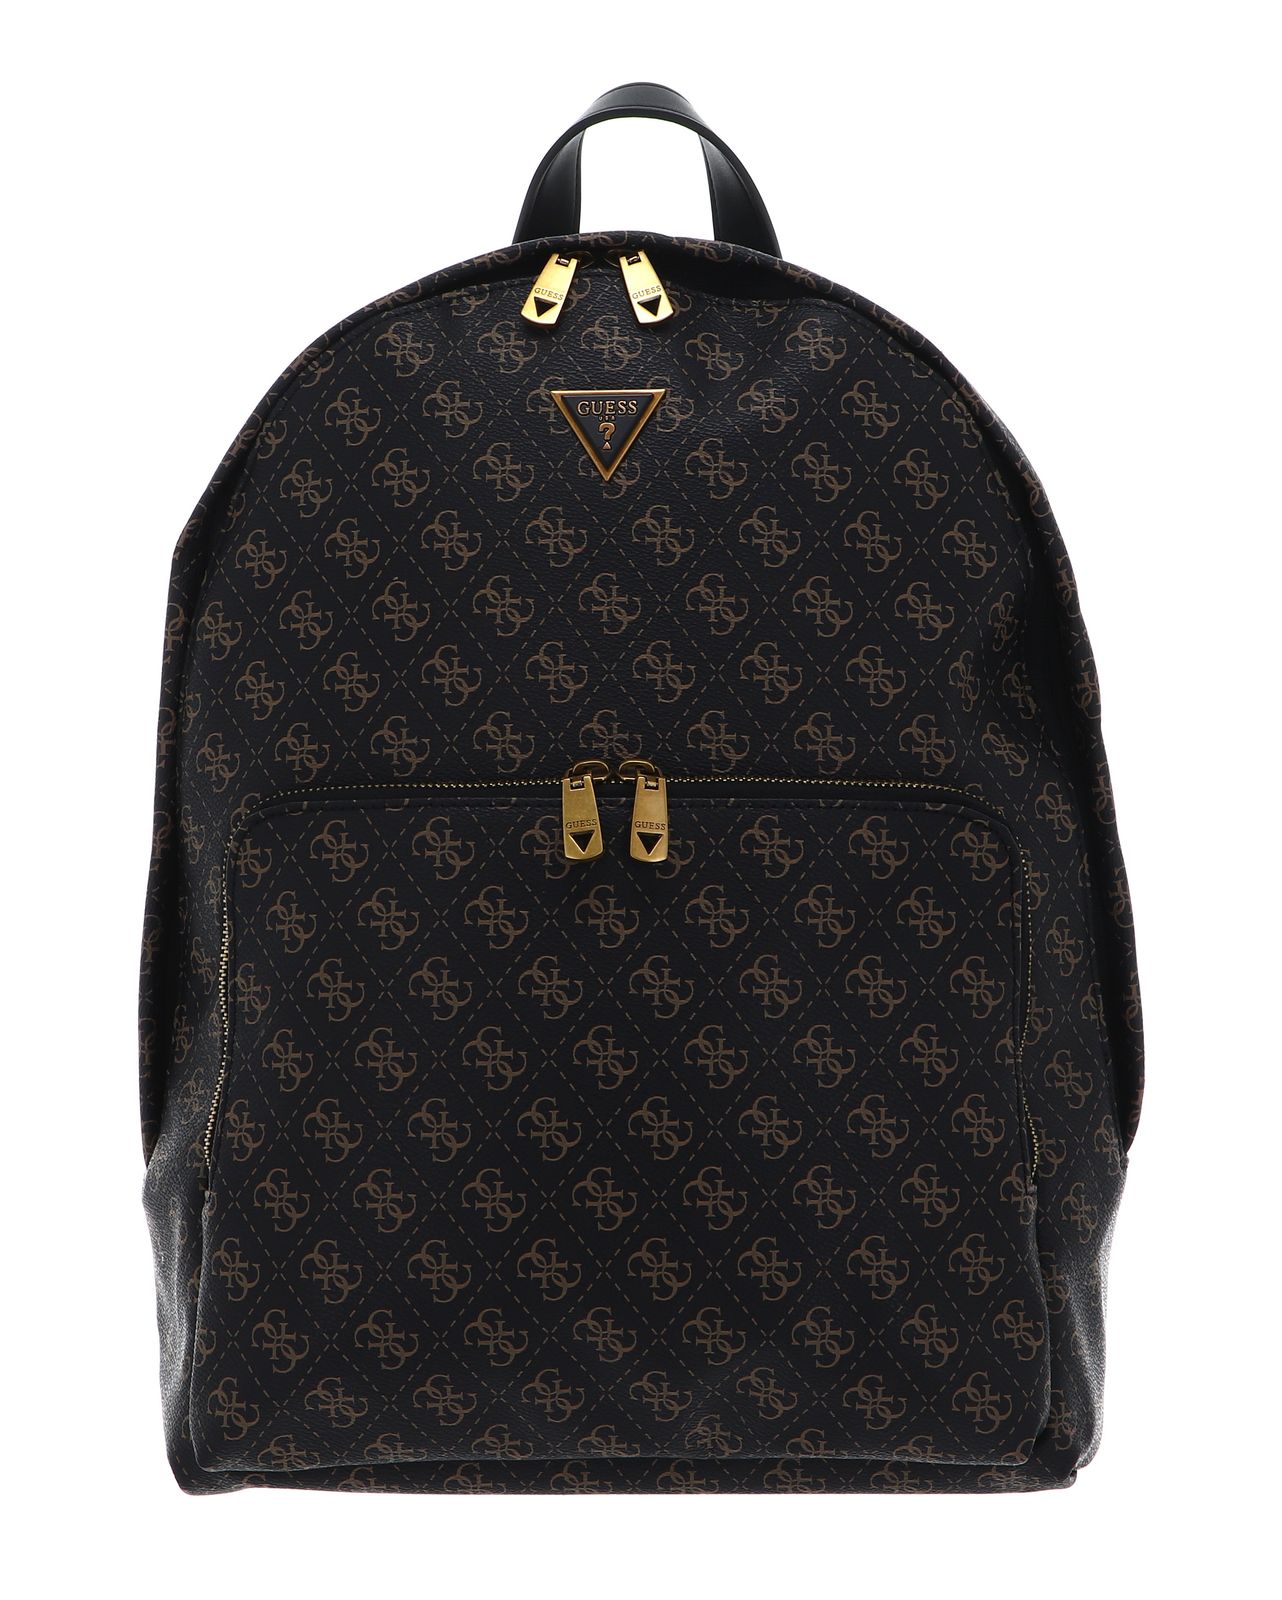 57 GUESS VEZZOLA ECO Mini Backpack